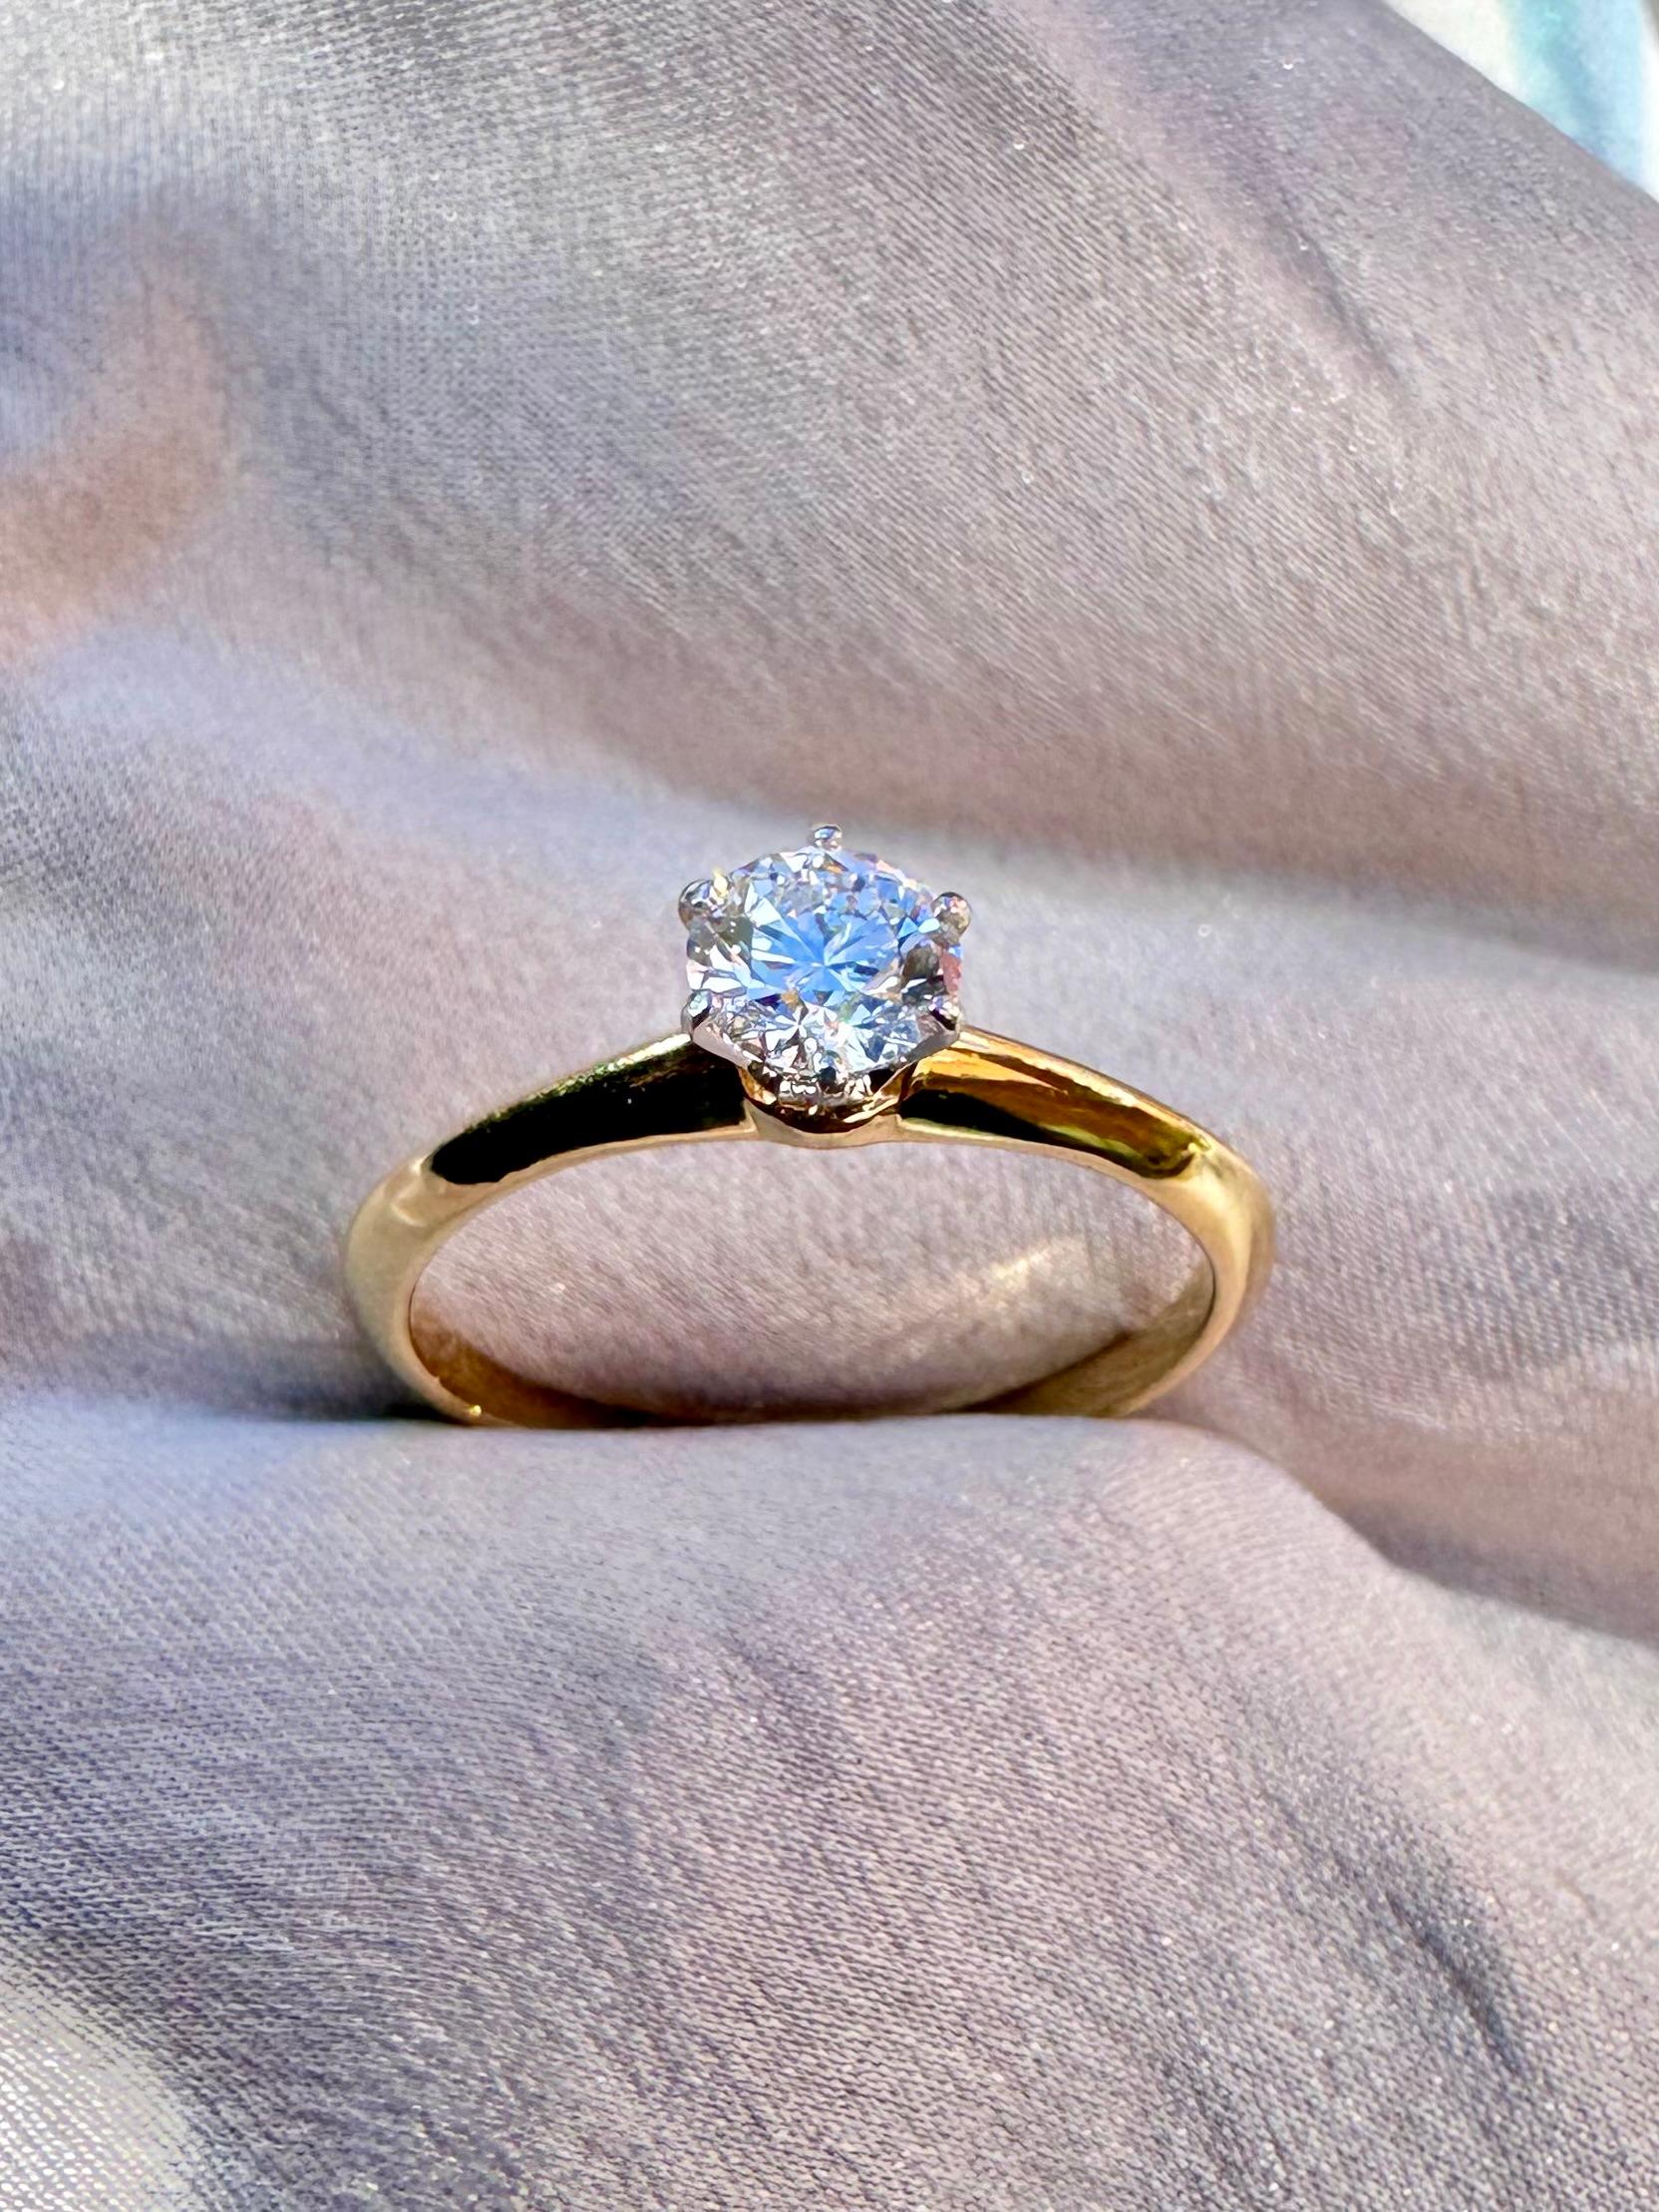 Tiffany & Co. 0.47 carat Diamond Solitaire Ring in 18K Gold For Sale 5